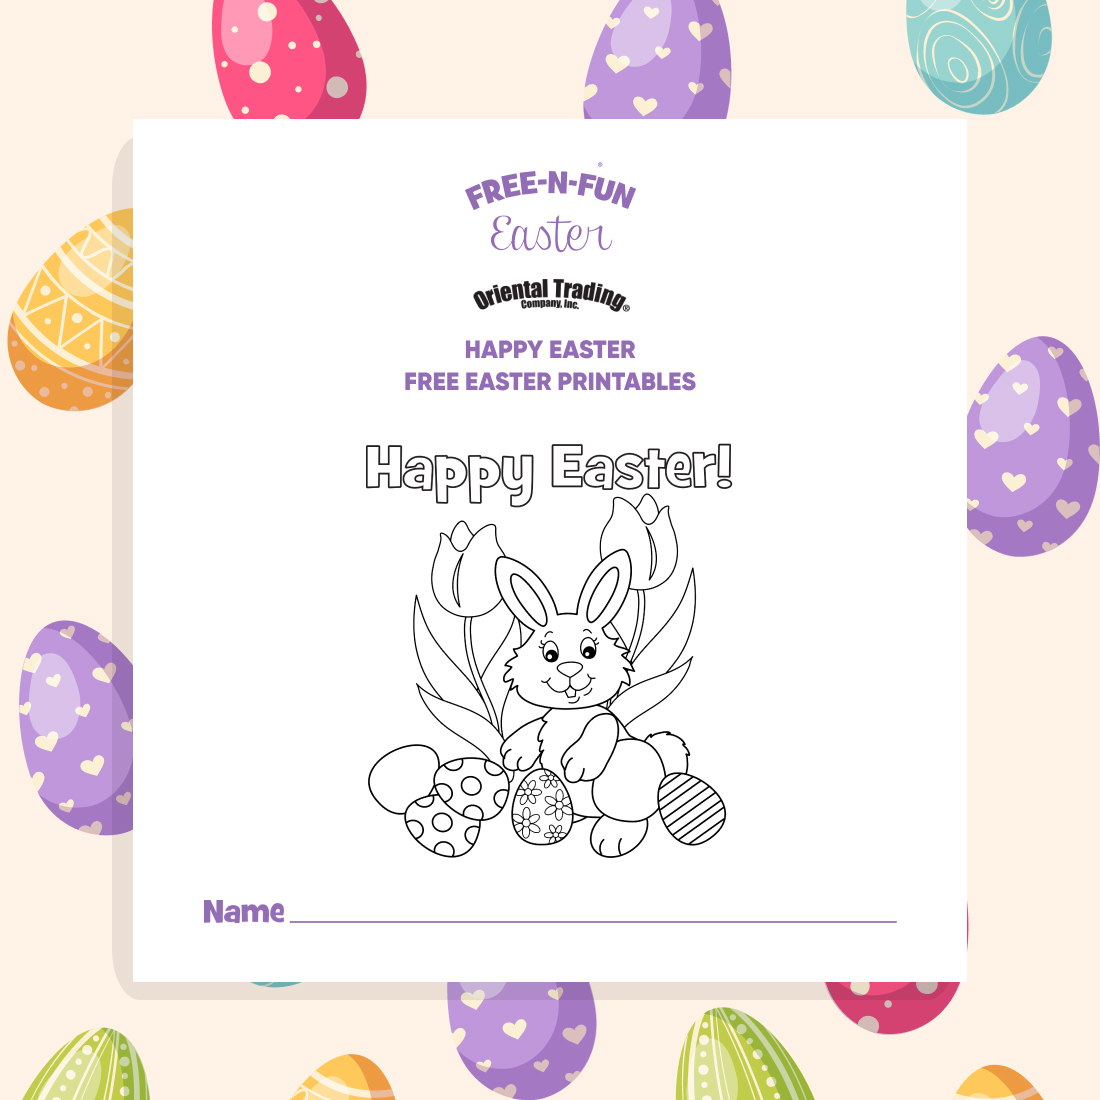 Happy Easter Free Easter Printables cover image.